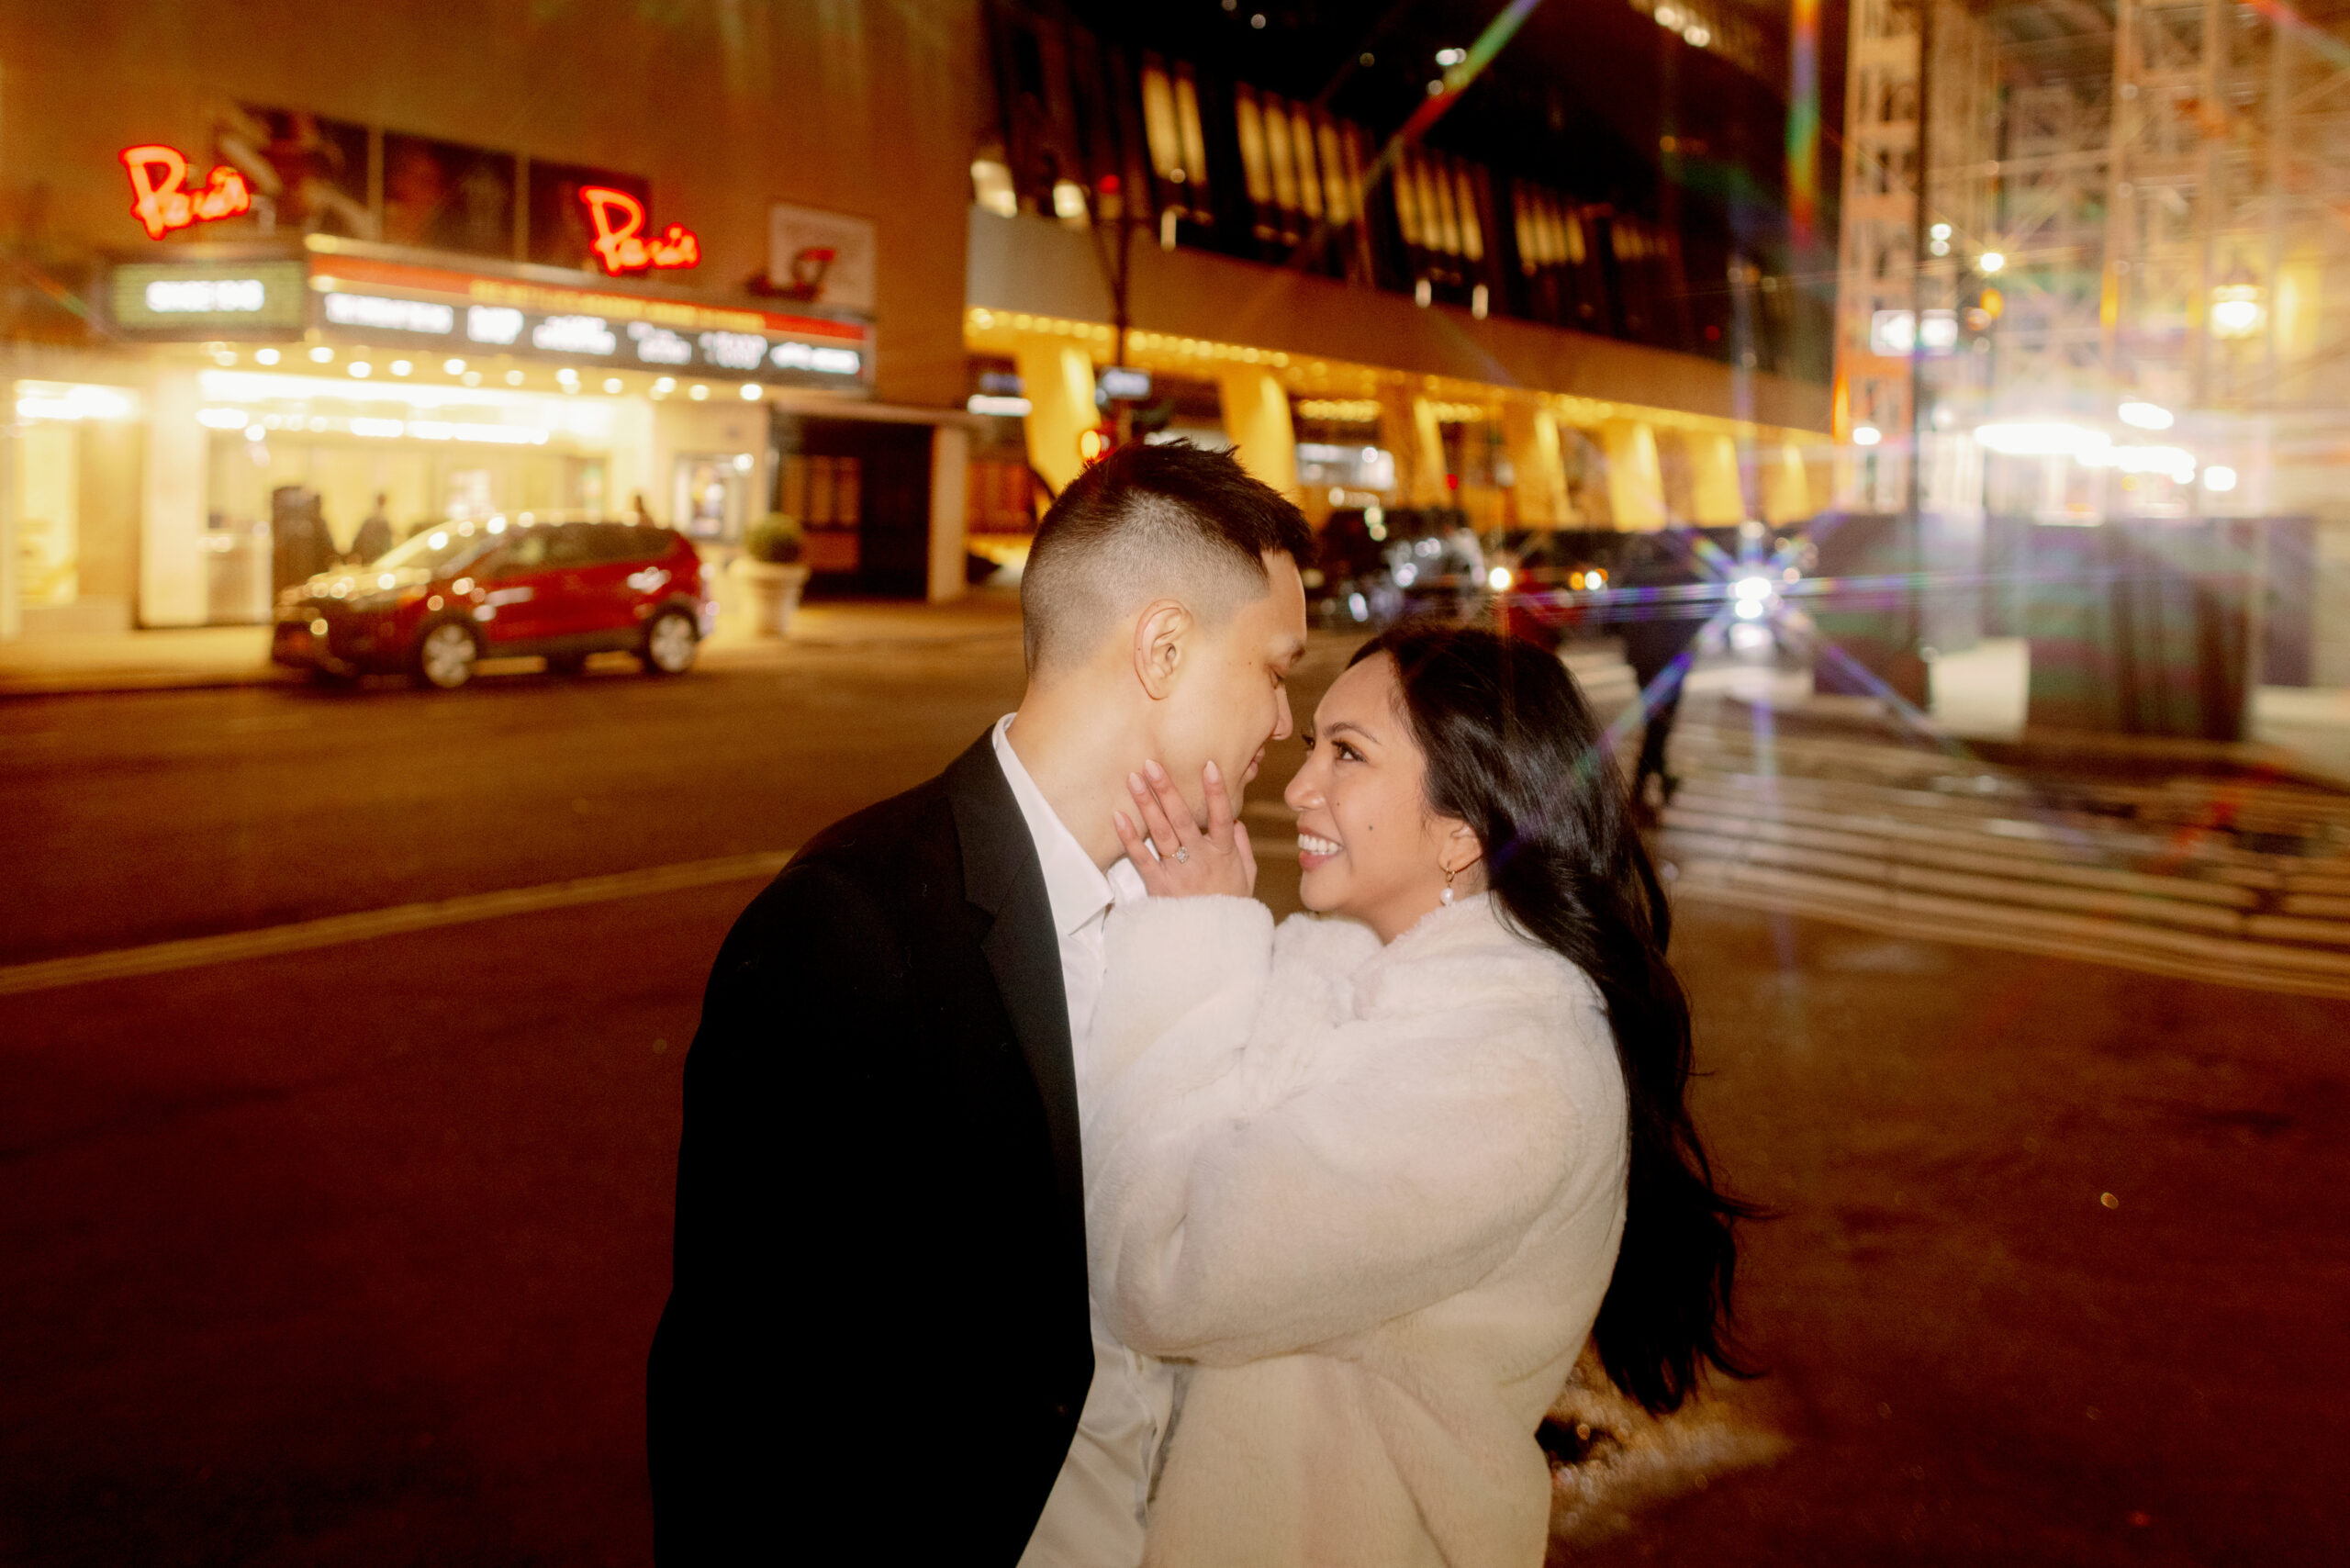 Editorial image of the happy couple in the streets of NYC. Engagement photos image by Jenny Fu Studio